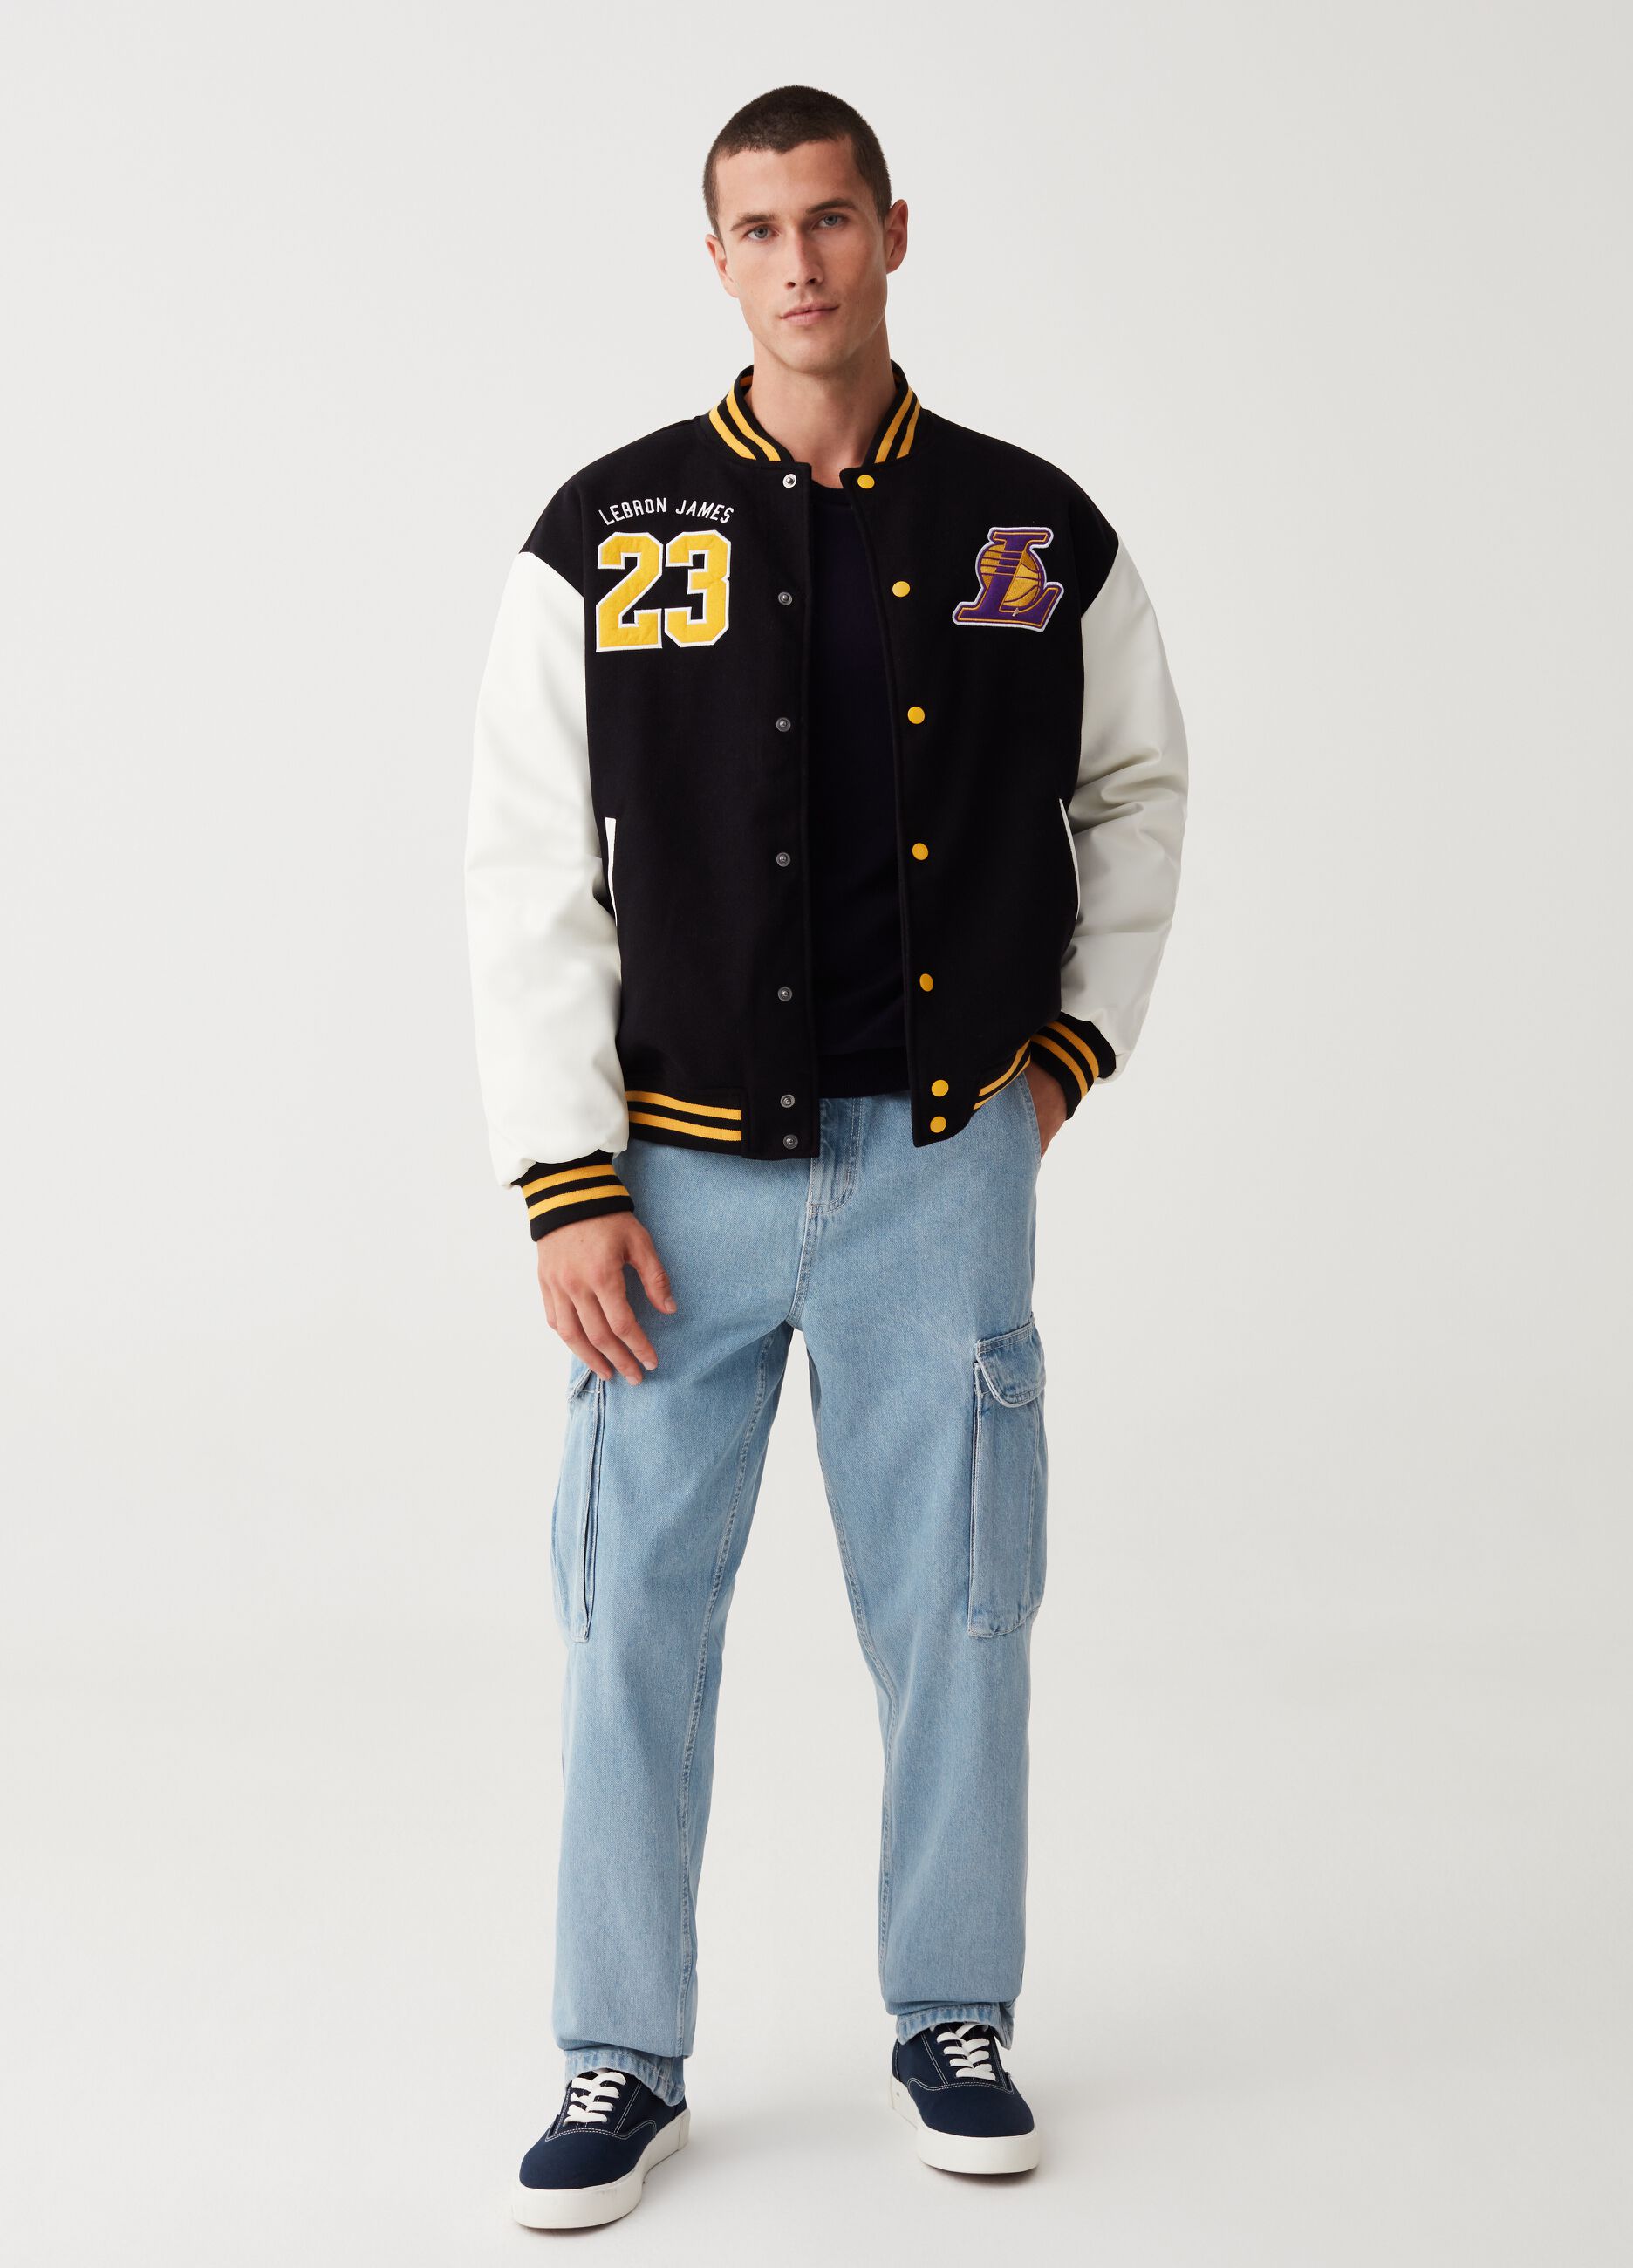 Vintage Oversized Varsity Custom Varsity Jackets For Men And Women  Gmiixders Baseball Stand Up Collar, Unisex College Patch Design Style  230307 From Balenciga_cardholder, $61.03 | DHgate.Com